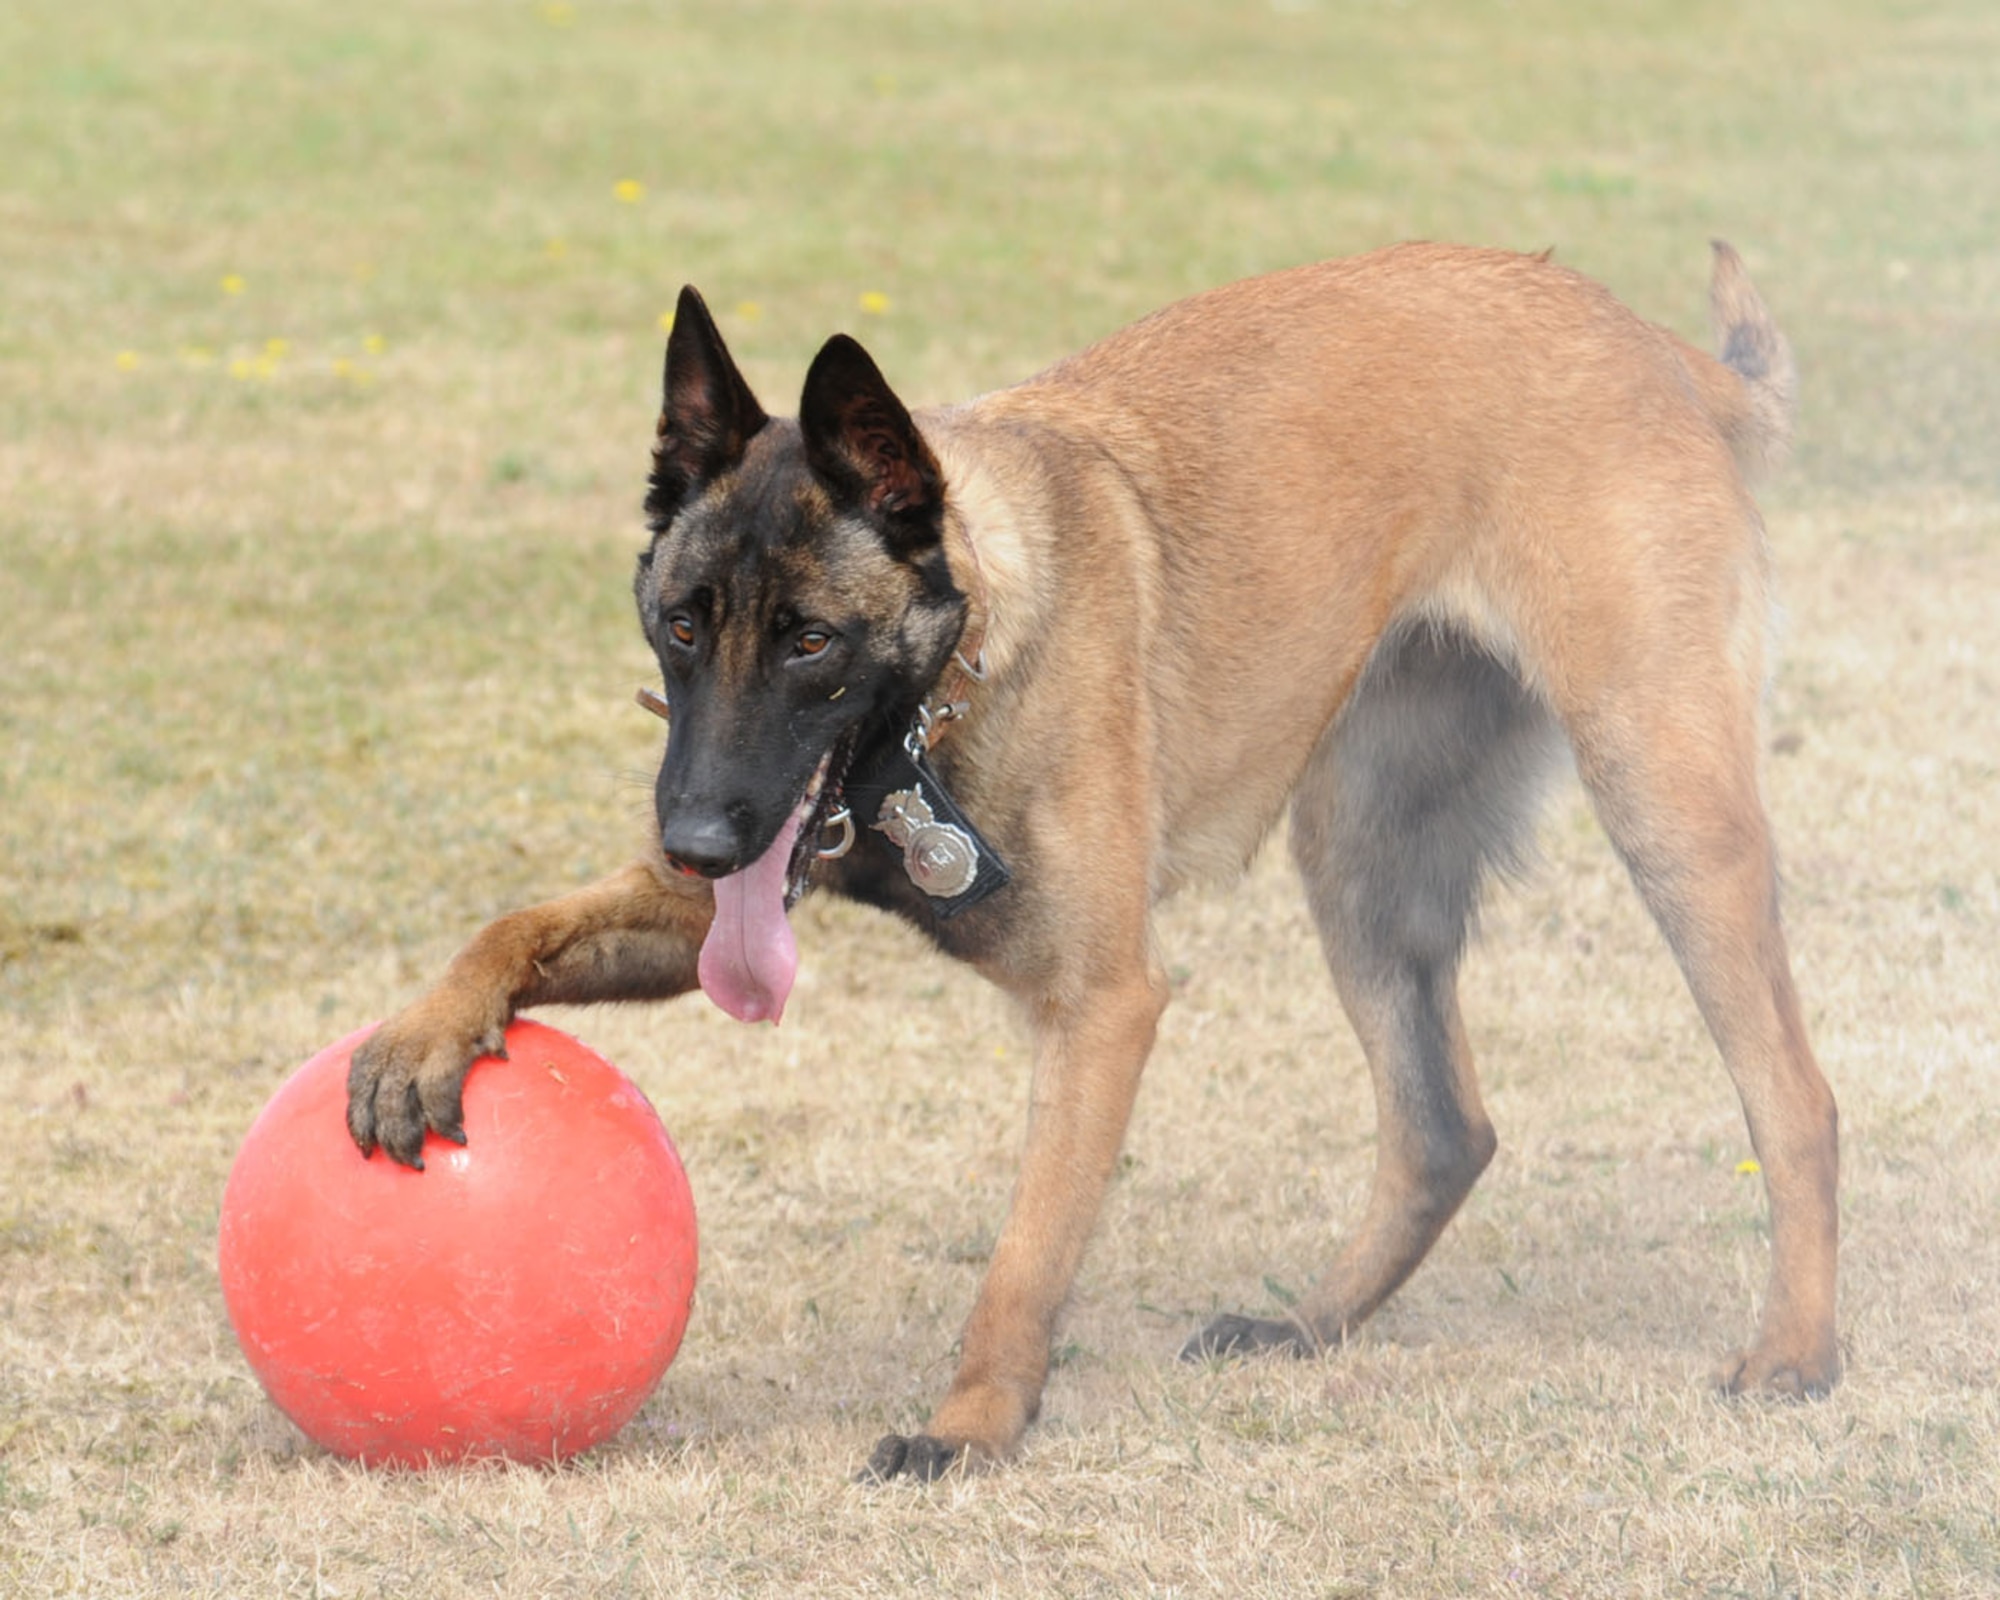 RAF MILDENHALL, England -- Military Working Dog Vvonya keeps a possessive paw on her ball during playtime with her handler Staff Sgt. Raymond McMahon, 100th Security Forces Squadron, July 9. (U.S. Air Force photo/Karen Abeyasekere)